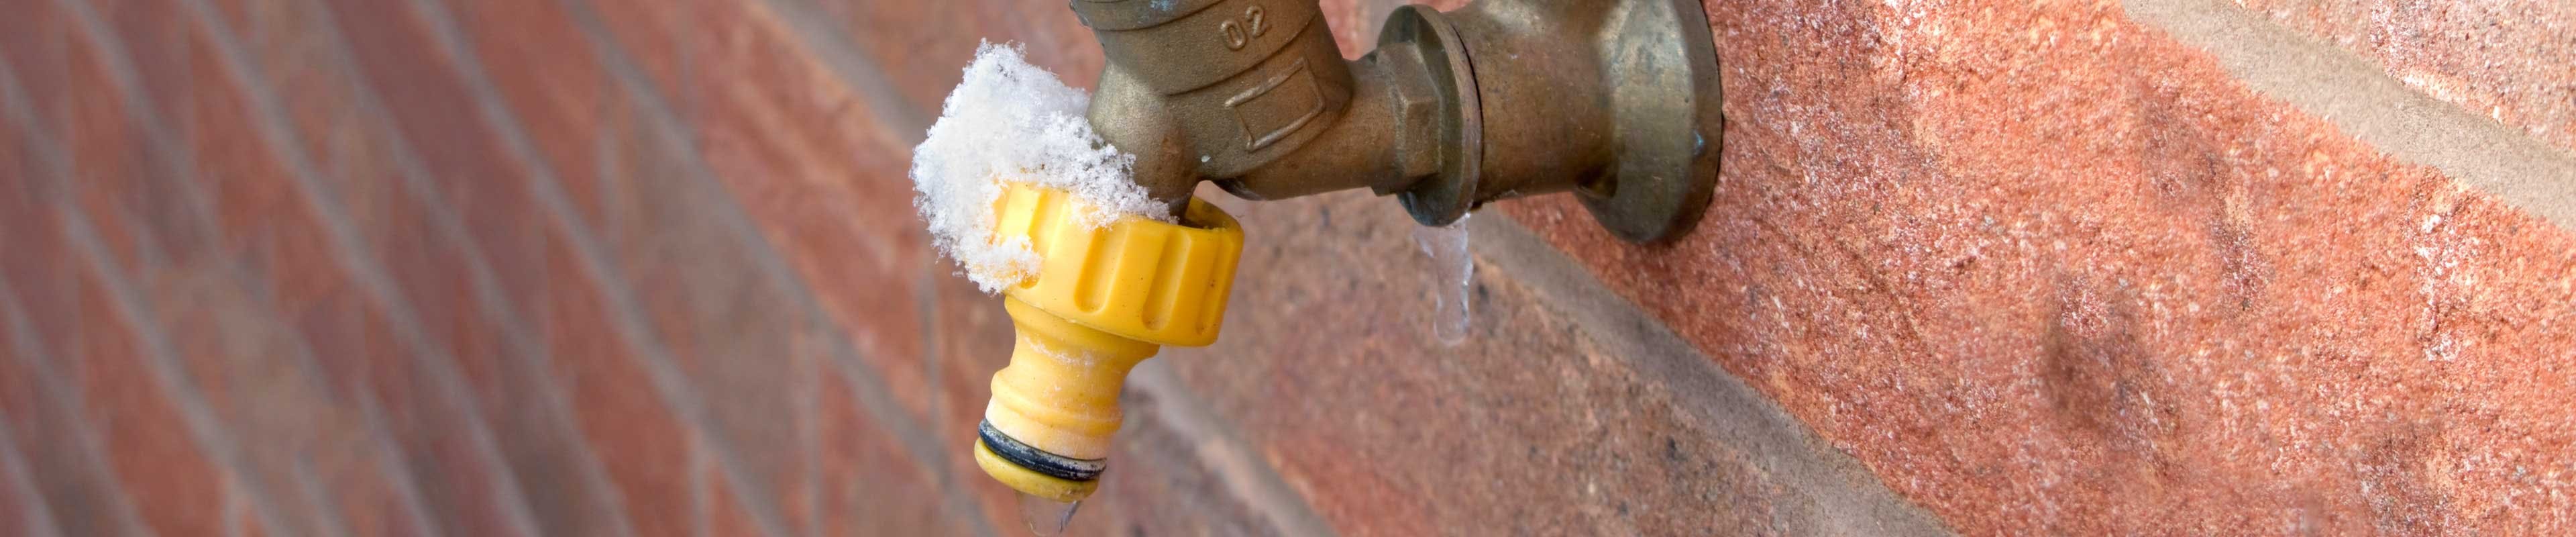 Frozen Pipes in Warm Climates